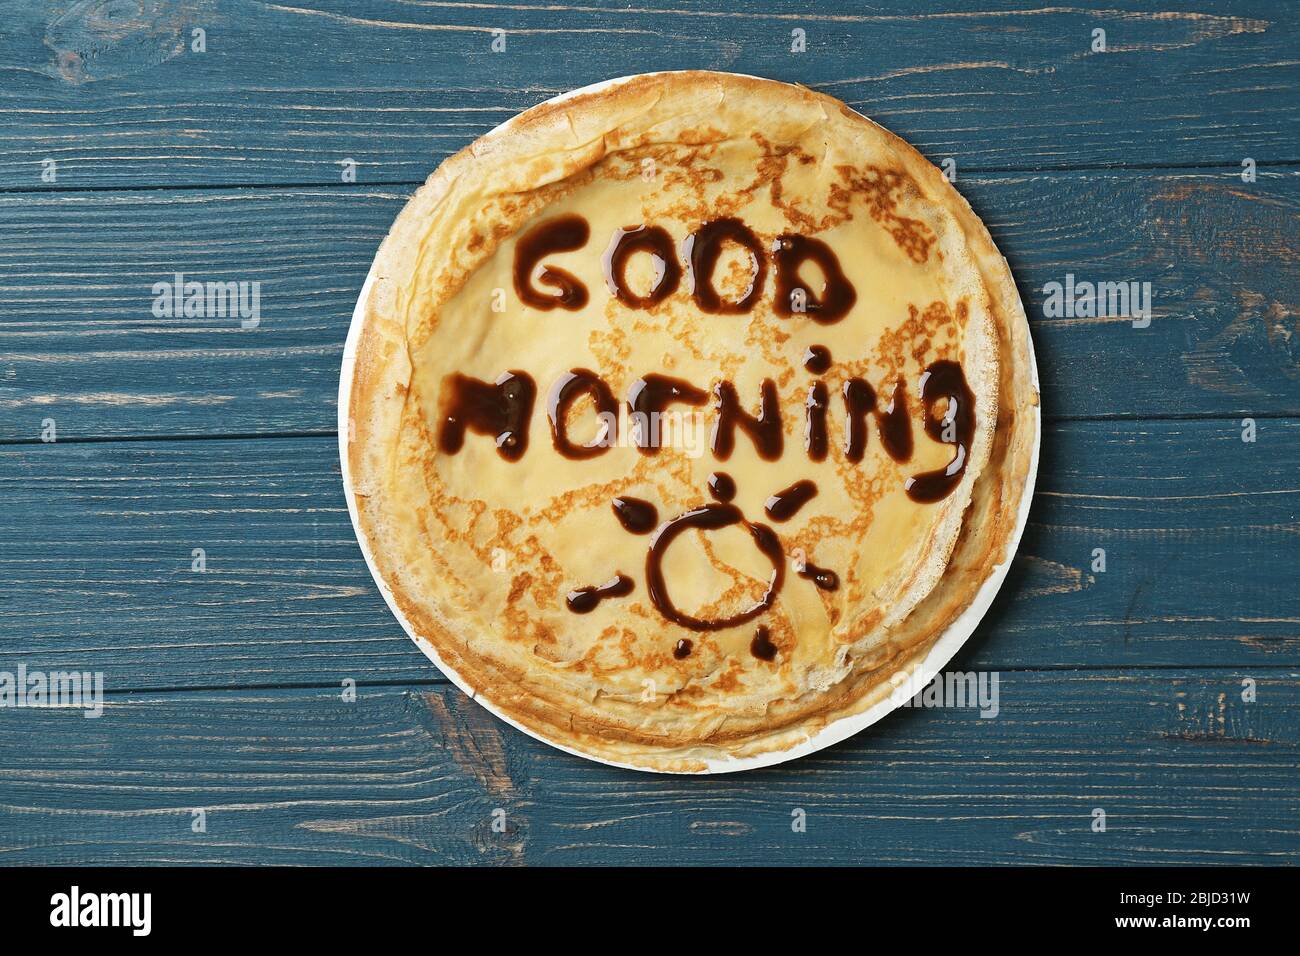 Words GOOD MORNING written on pancakes with chocolate, wooden ...